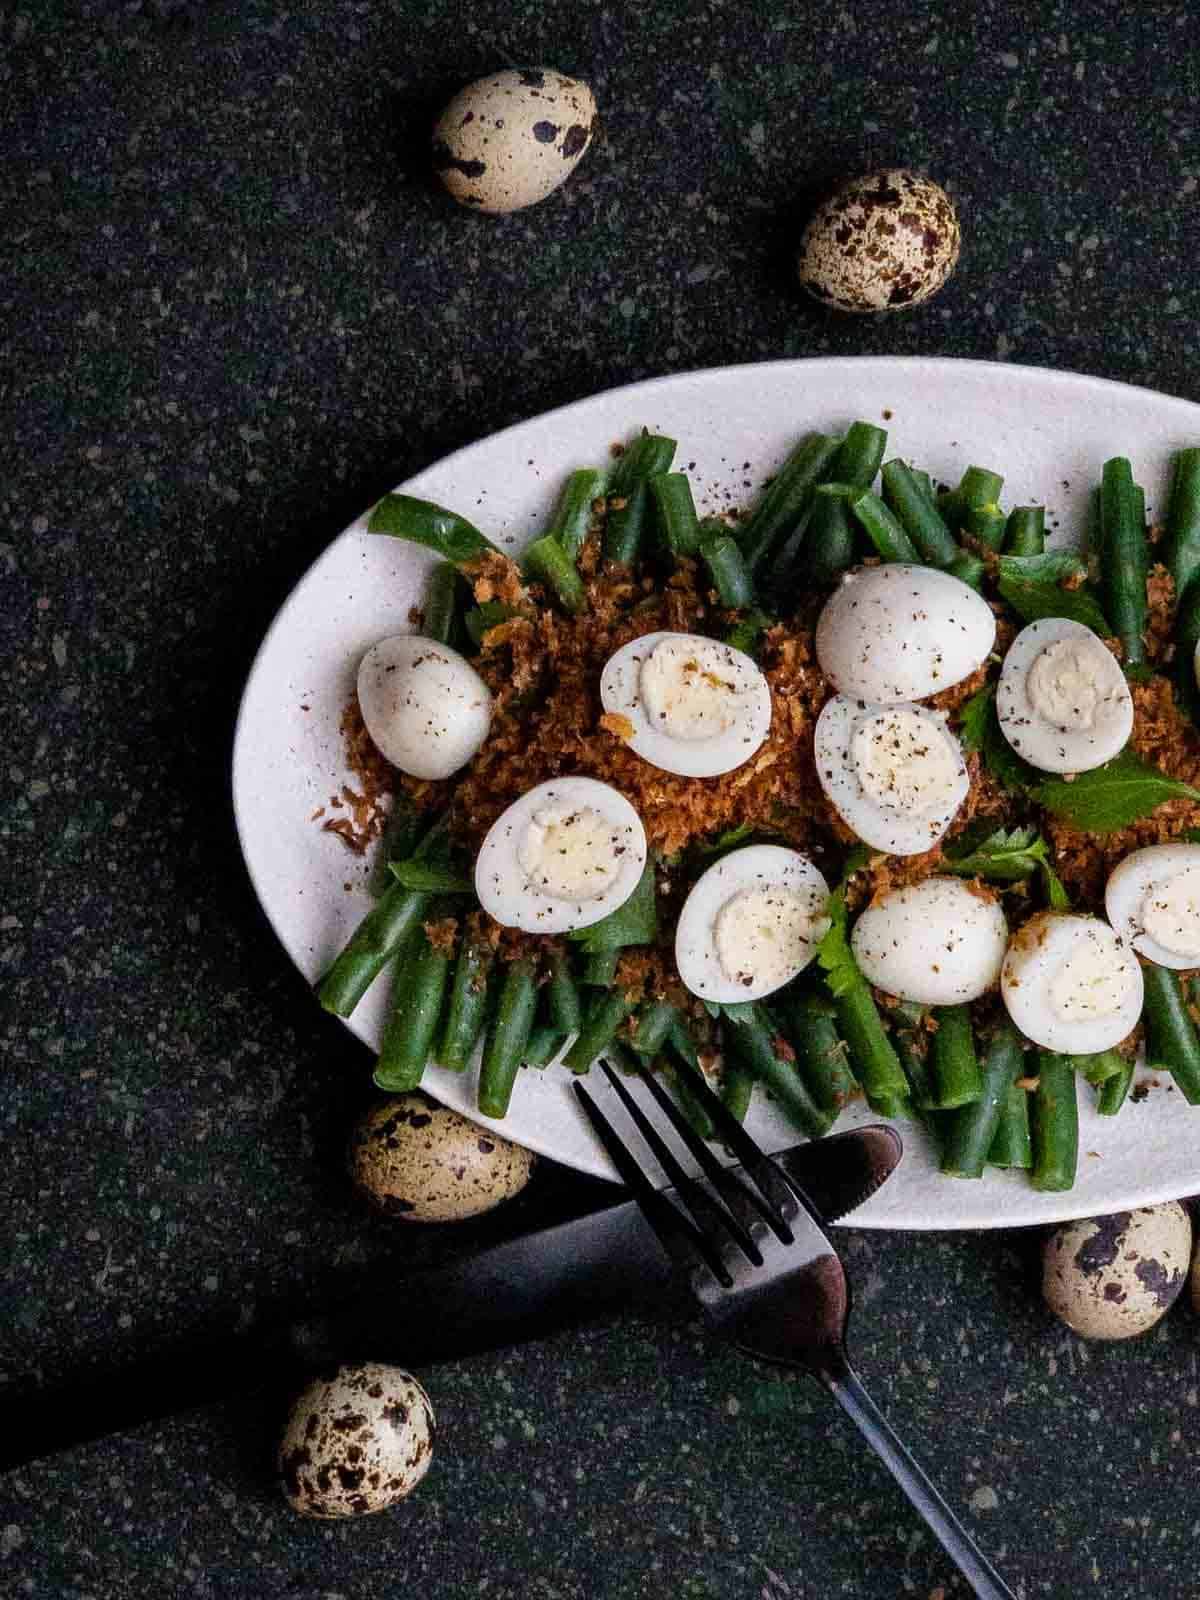 Green Bean, Truffle Butter Breadcrumbs and Quail Egg Salad on a white plate with black cutlery and whole quail eggs on the side